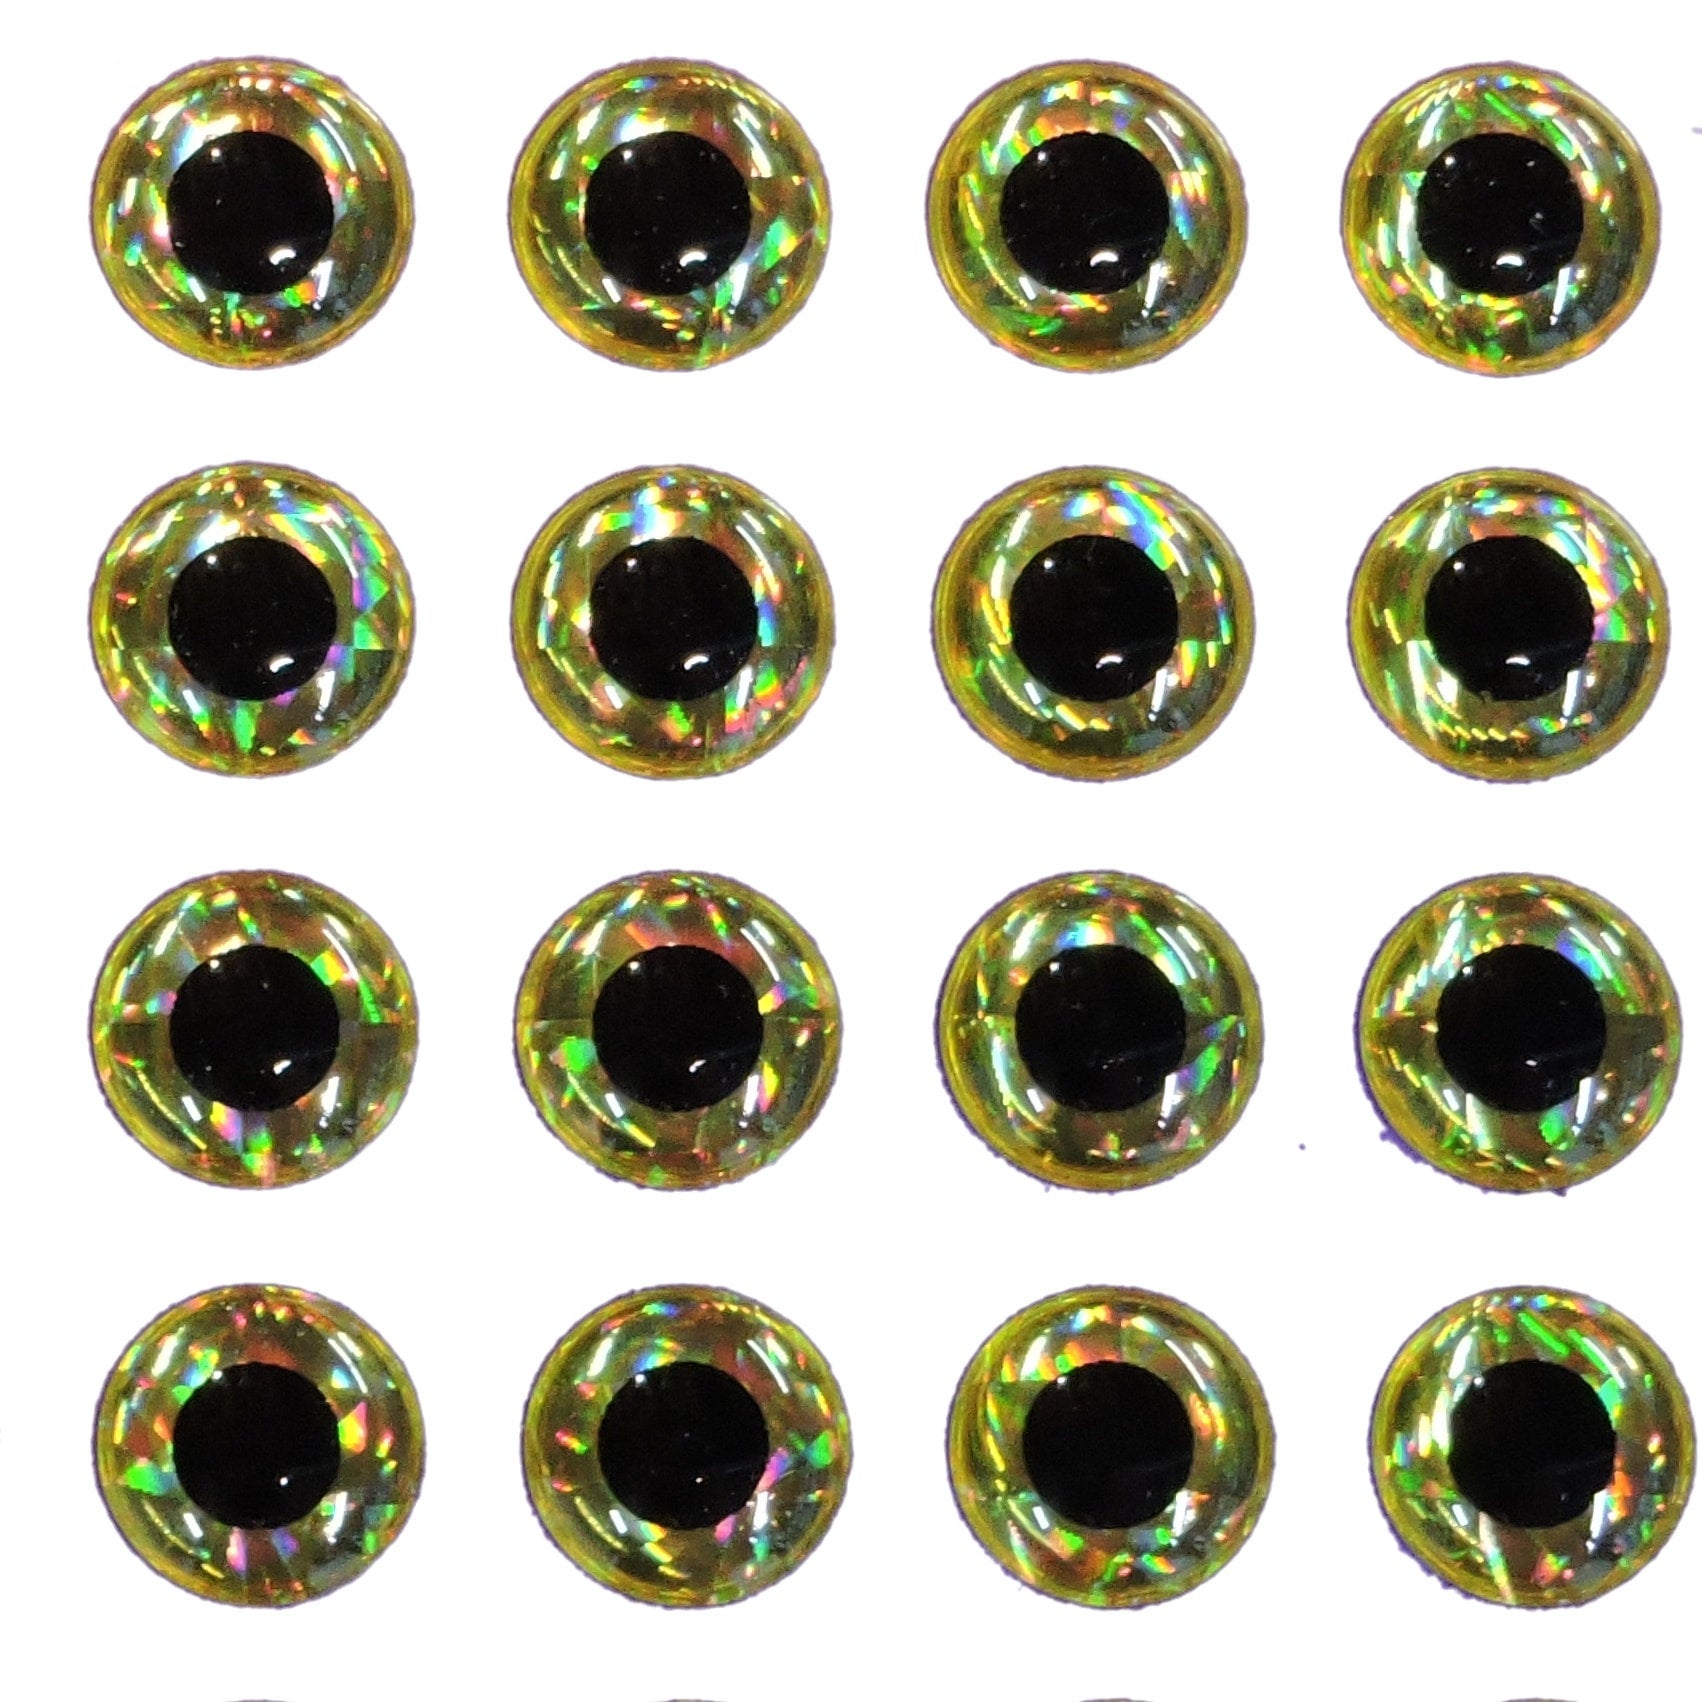 6mm (1/4) - 3D Holographic Eyes for Fly Tying and Lure Making (168 Count)